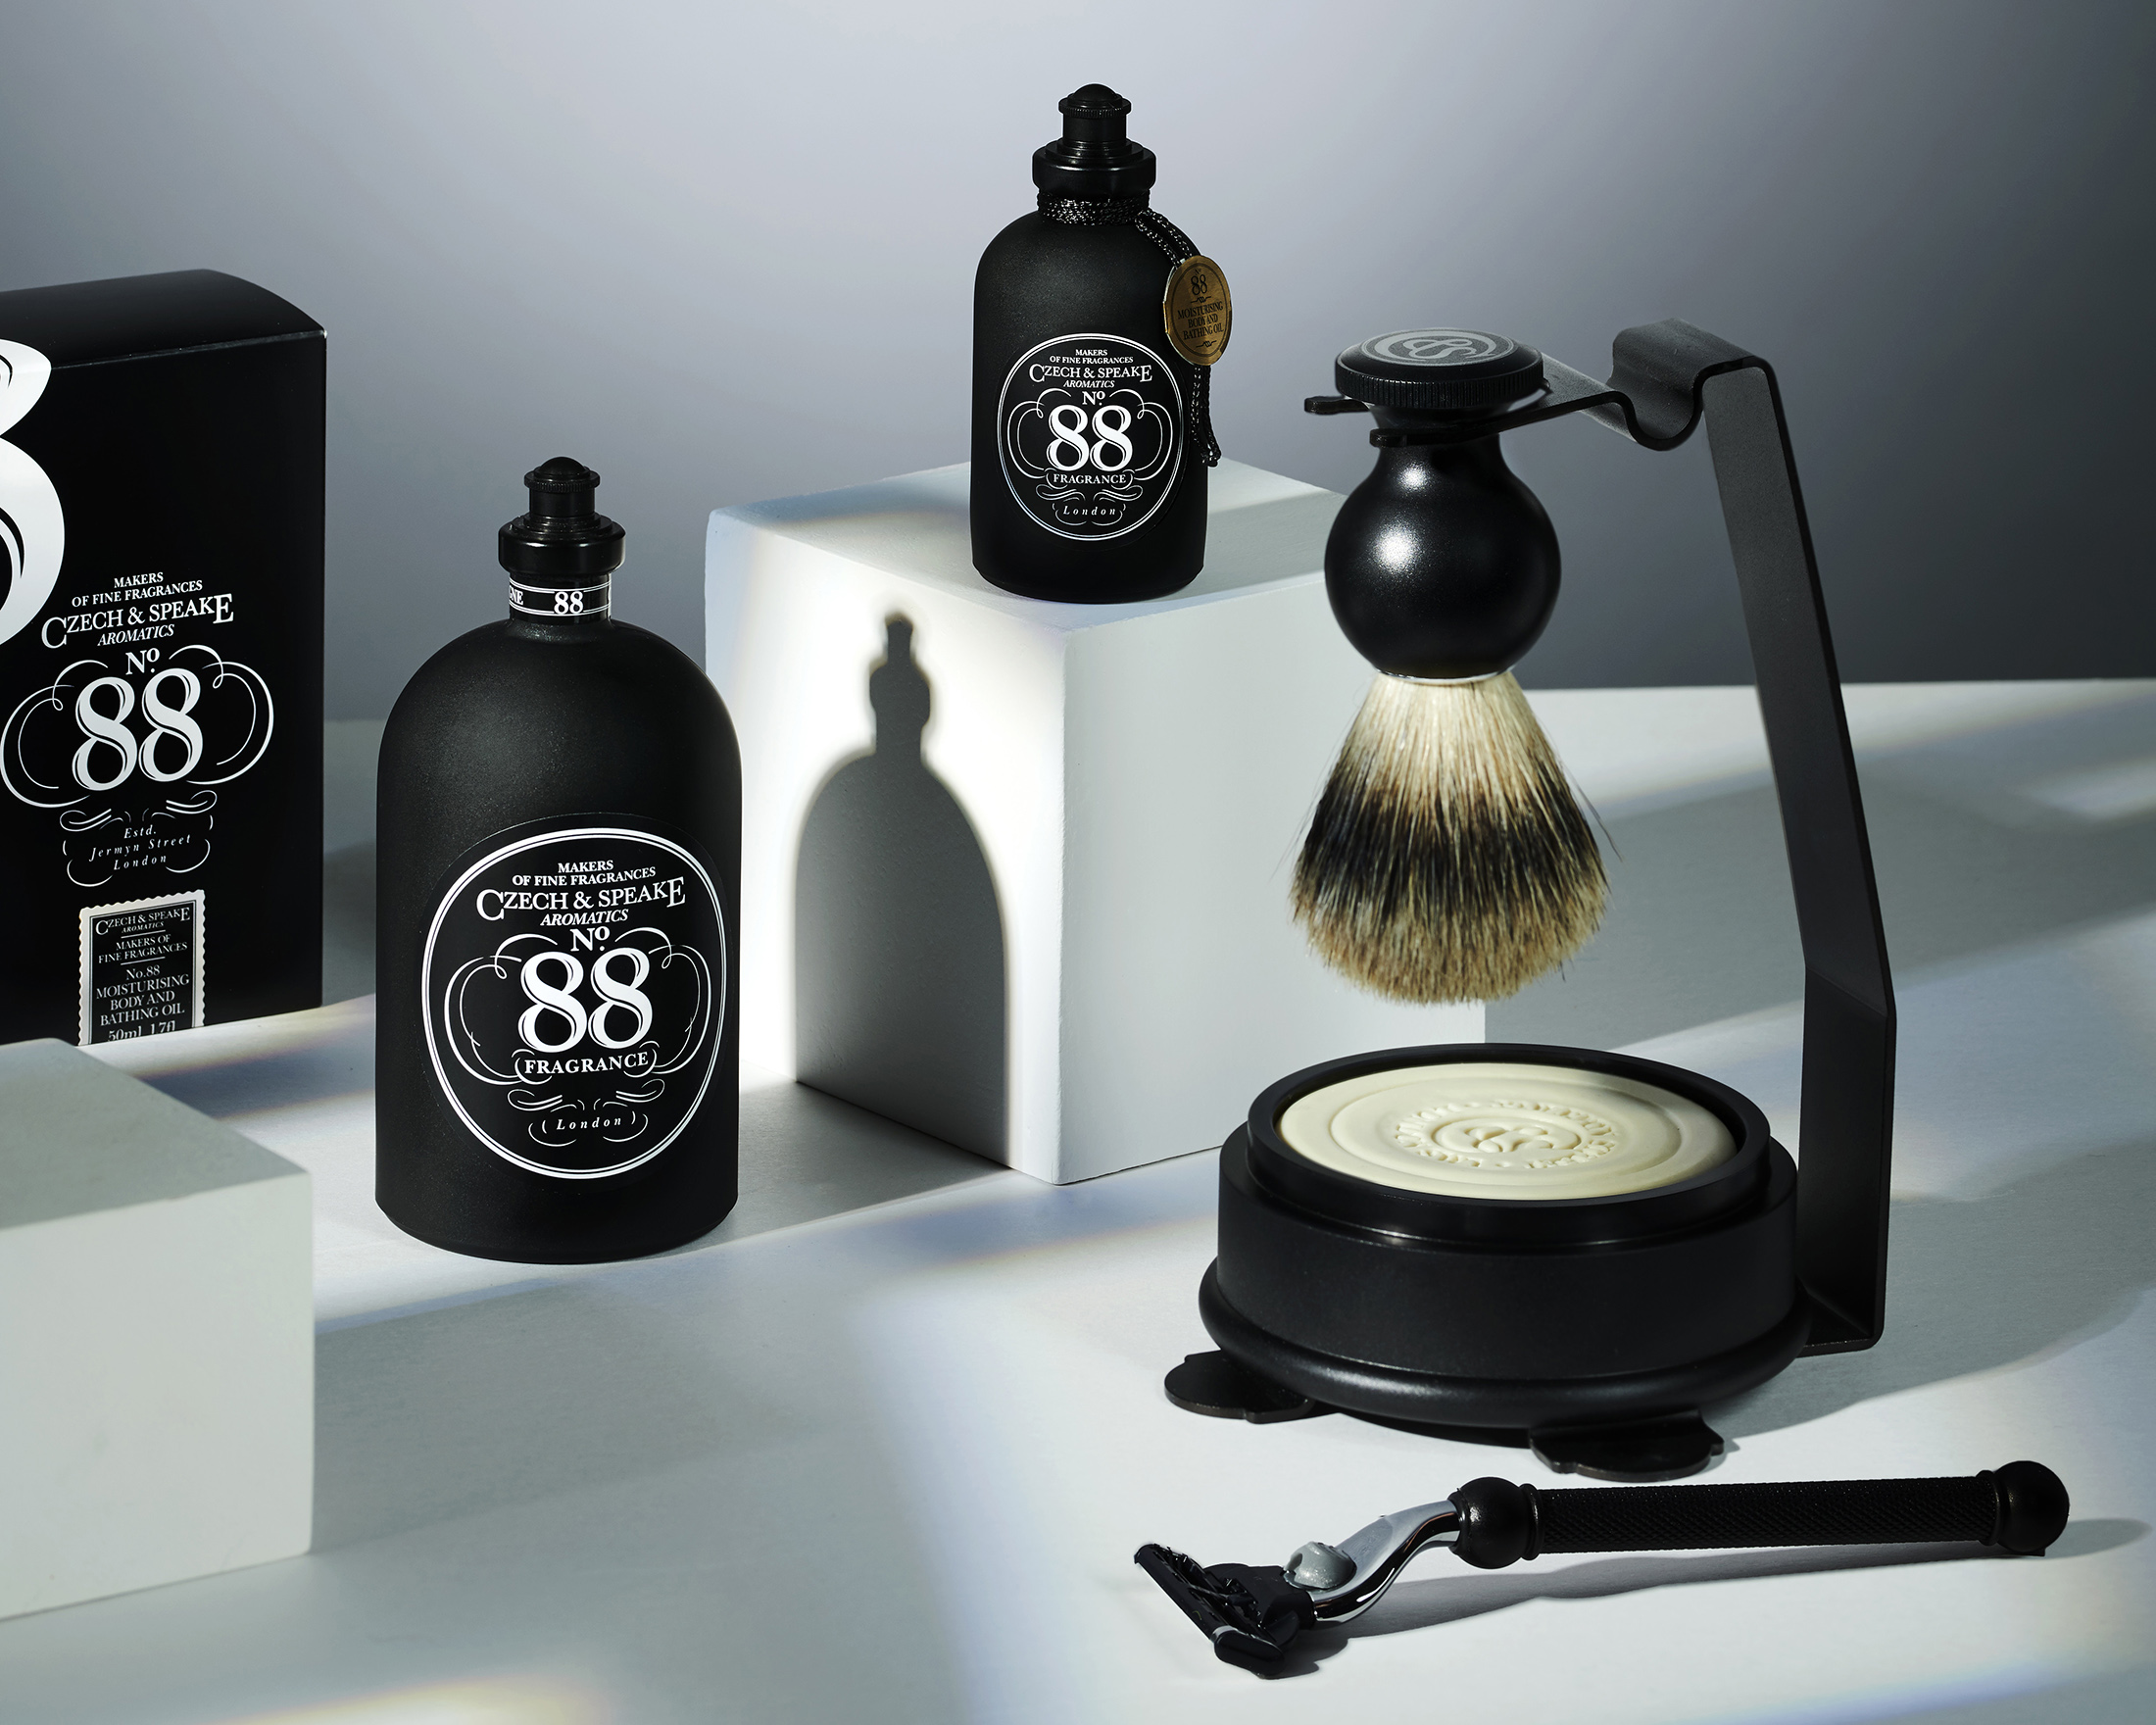 The No.88 collection with fragrance, aftershave and the Shaving Set & Stand